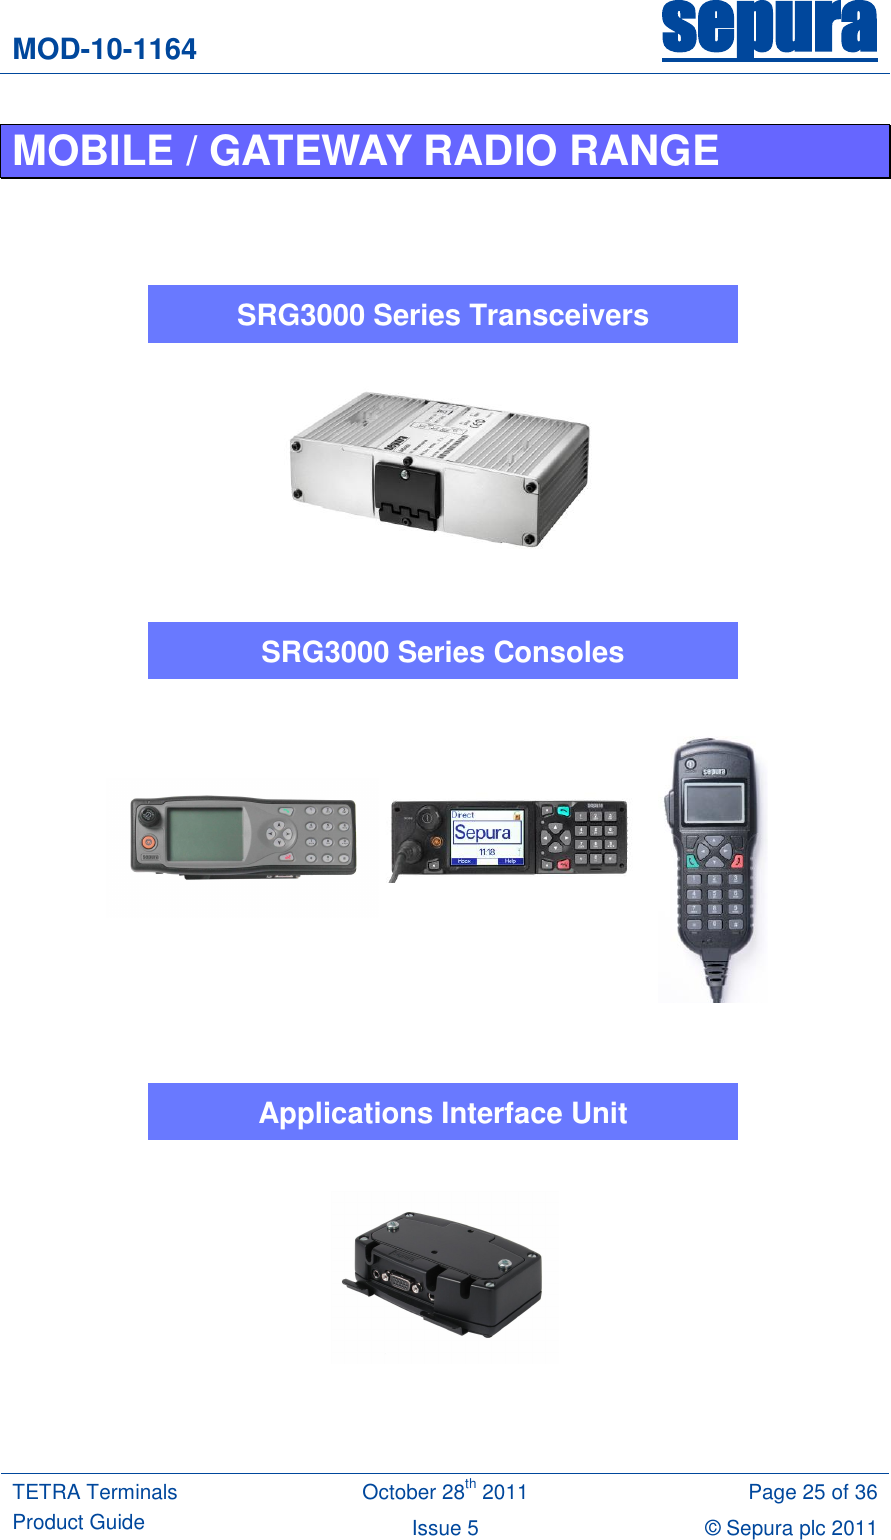 MOD-10-1164 sepura  TETRA Terminals Product Guide October 28th 2011 Page 25 of 36 Issue 5 © Sepura plc 2011   MOBILE / GATEWAY RADIO RANGE                                 SRG3000 Series Transceivers Applications Interface Unit SRG3000 Series Consoles 